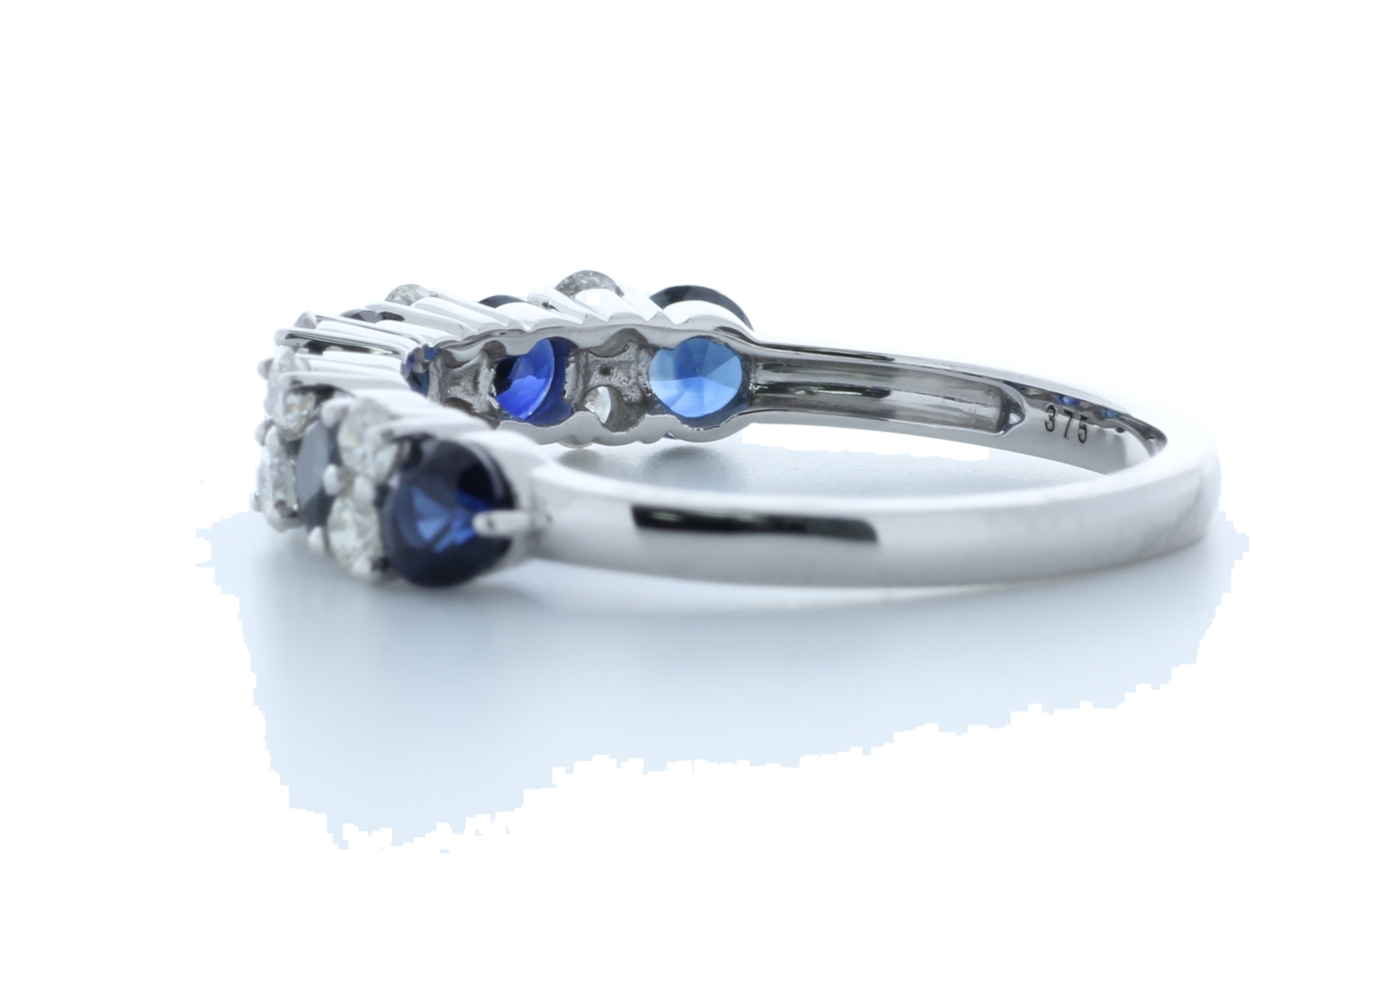 9ct White Gold Claw Set Semi Eternity Diamond and Sapphire Ring (S1.31) 0.31 Carats - Image 4 of 5